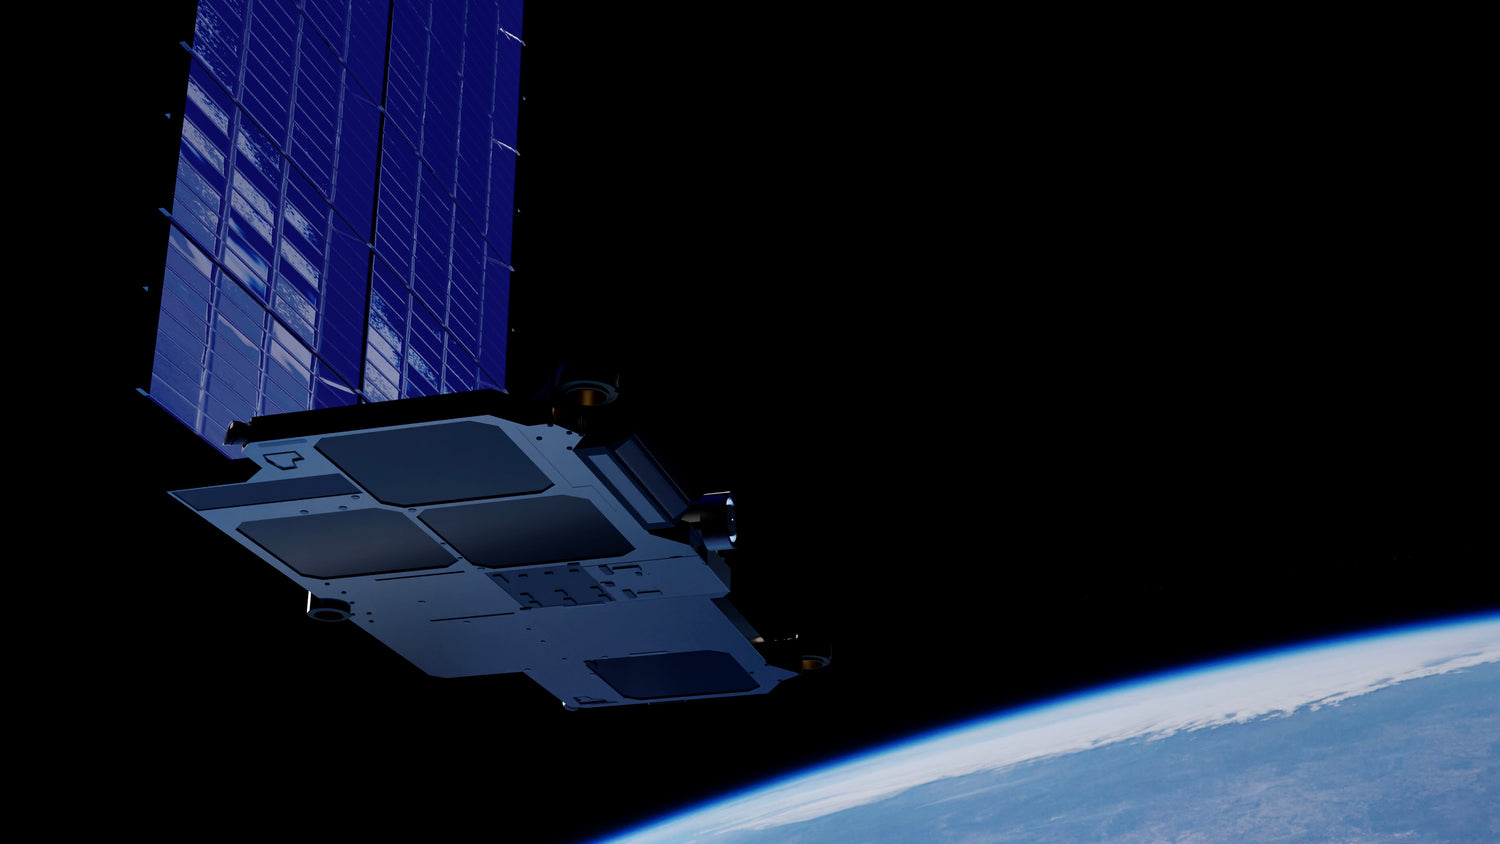 SpaceX Confident About Its Starlink Constellation for Satellite